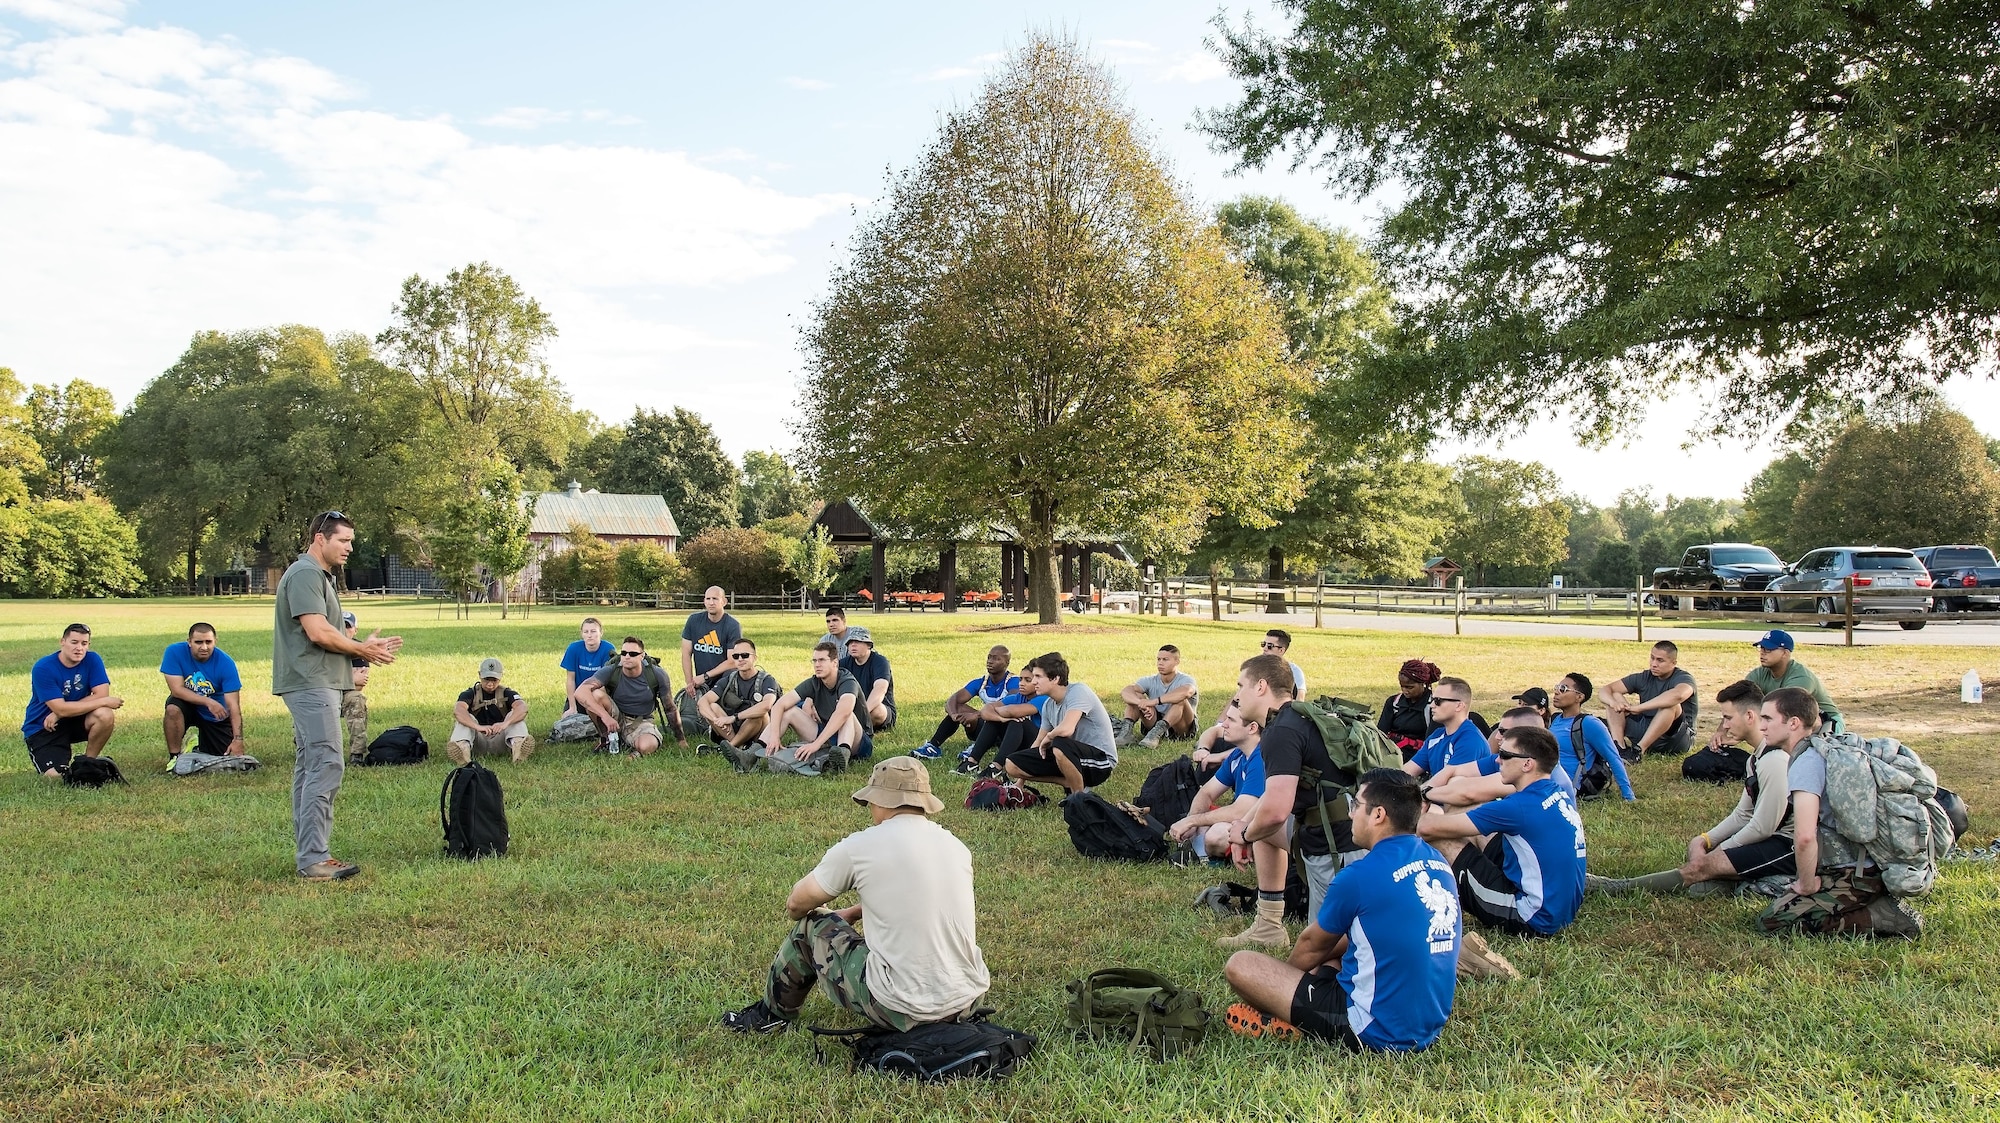 U.S. Army Master Sgt. Todd Fetzer, 1st Special Forces Command (Airborne), Ft. Bragg, N.C., tells the history of GORUCK to event participants Oct. 6, 2017, at Brecknock Park in Camden, Del. Fetzer, also known by his GORUCK nickname “Fury,” was the cadre for the 2017 GORUCK Light Challenge. (U.S. Air Force photo by Roland Balik)